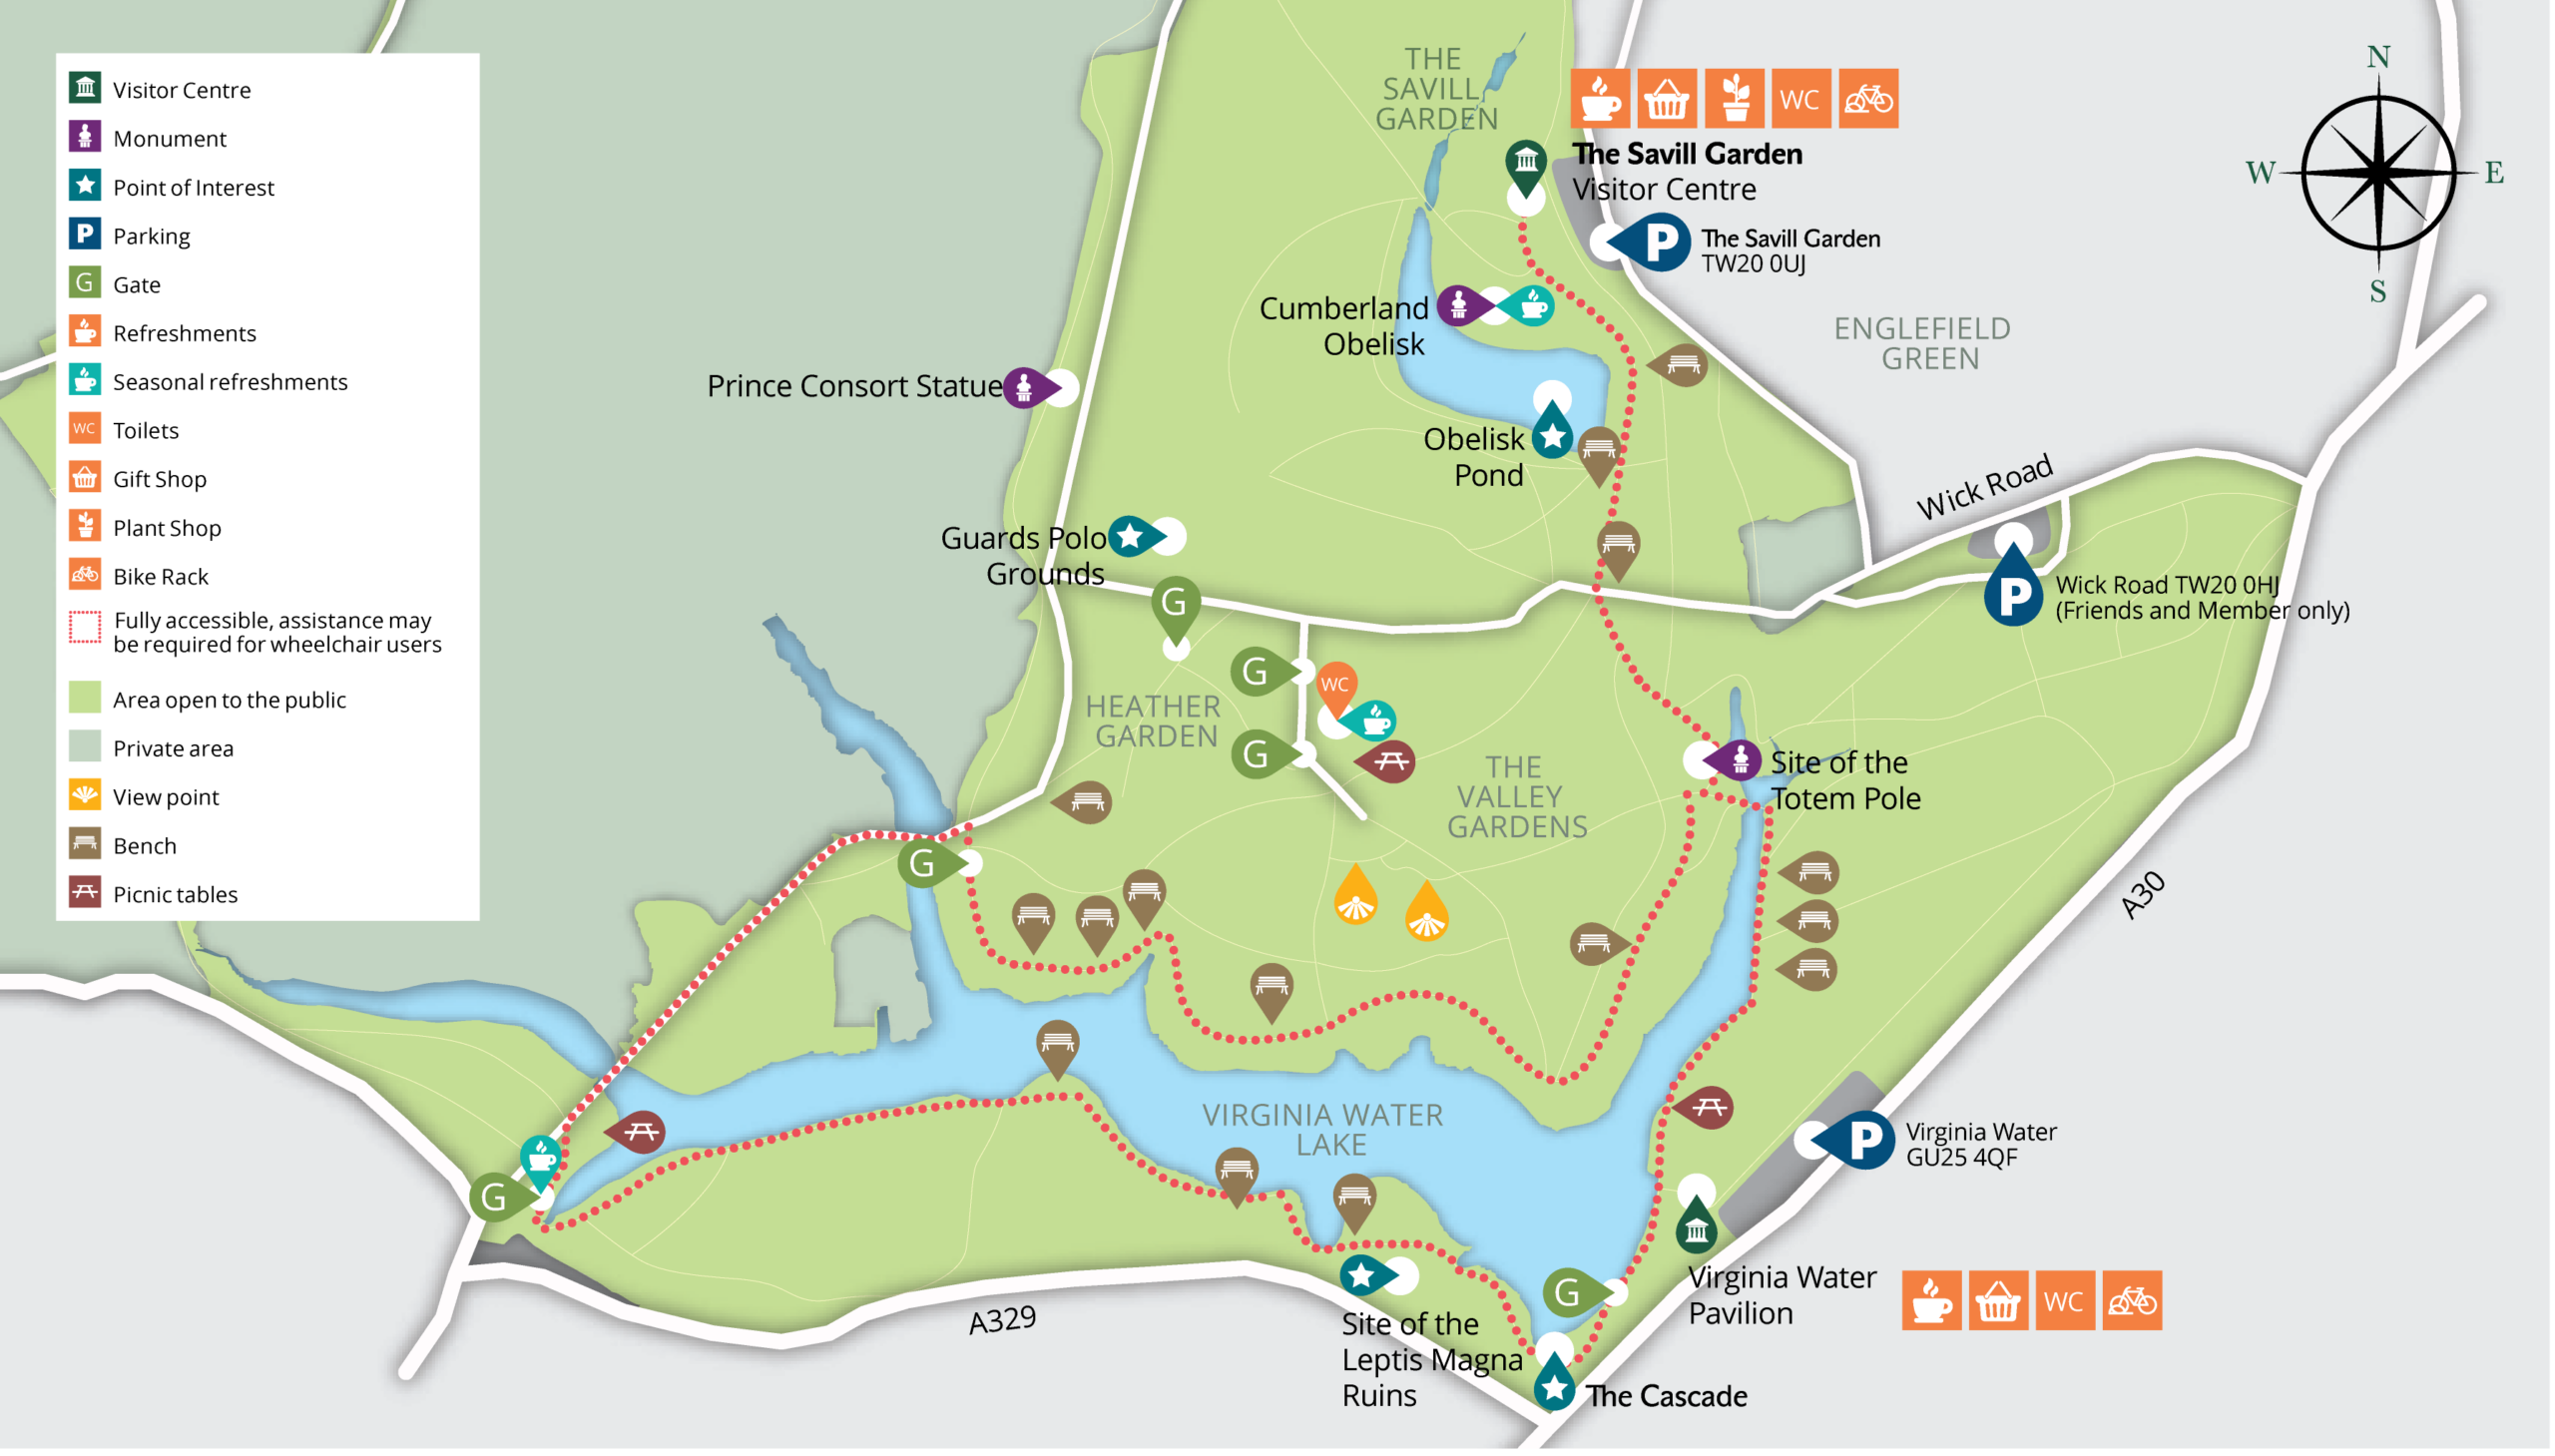 Walking map to show the route from The Savill Garden to Virginia Water.